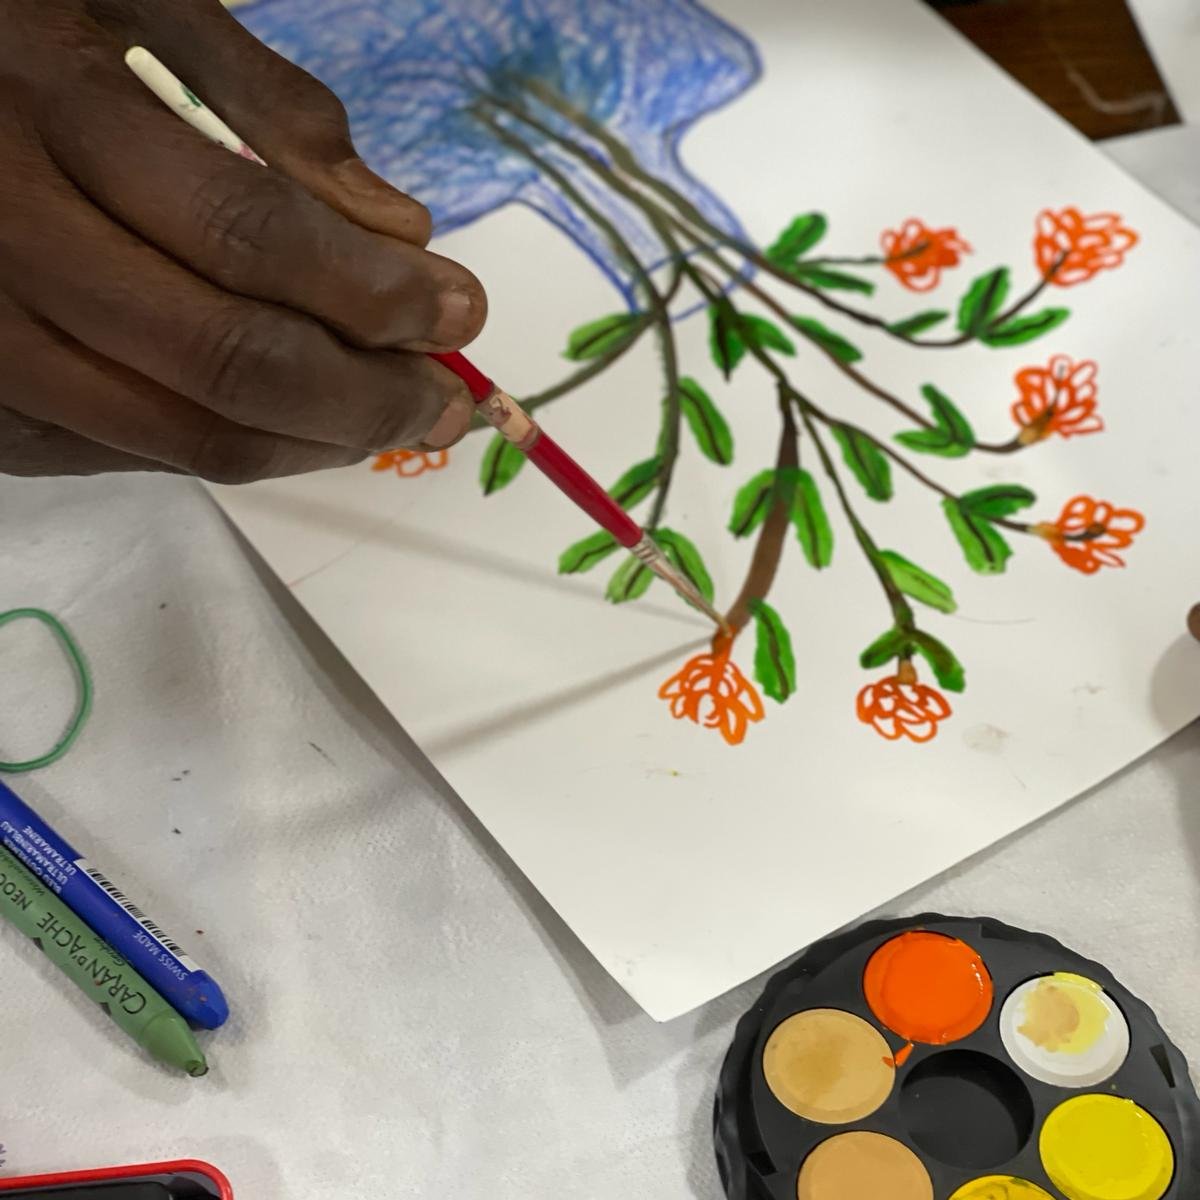 The Art & Writing class recently explored the theme of Spring Flowers and beauty after winter 🌷🌼🌸 Art is a powerful tool in exploring complex emotions. Classes led by our three Artists in Residence offer a therapeutic space to nurture creativity and confidence rebuilding.